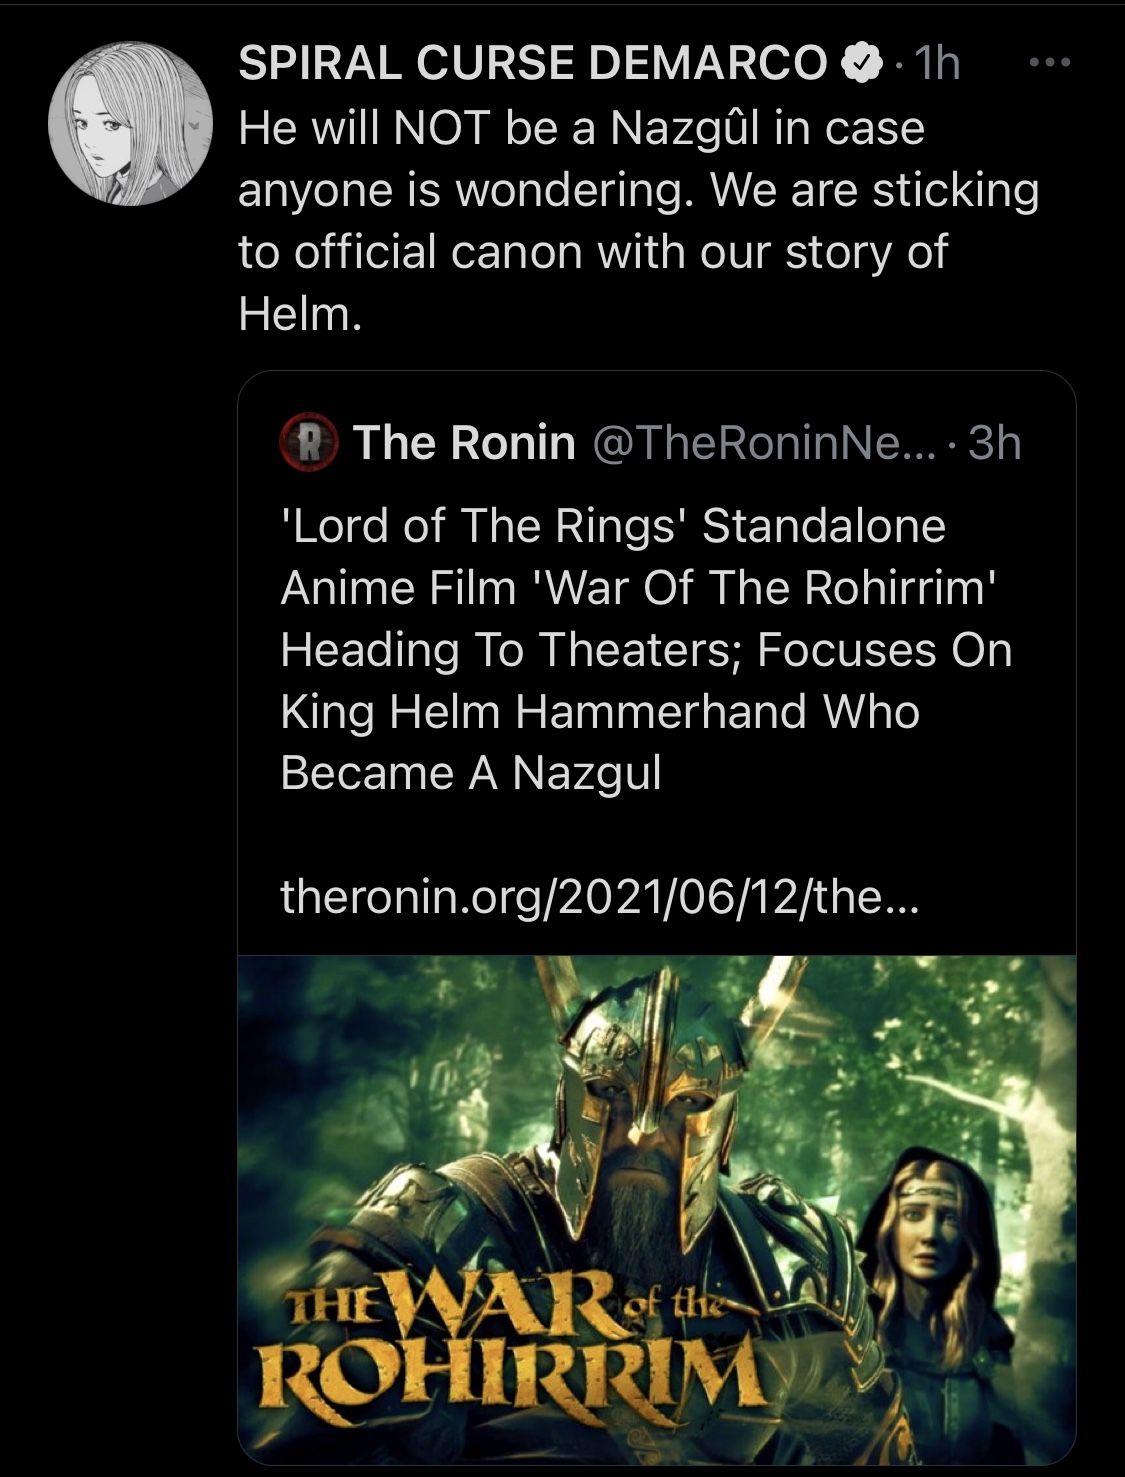 Brian Cox Leads Cast for The Lord of the Rings: The War of the Rohirrim